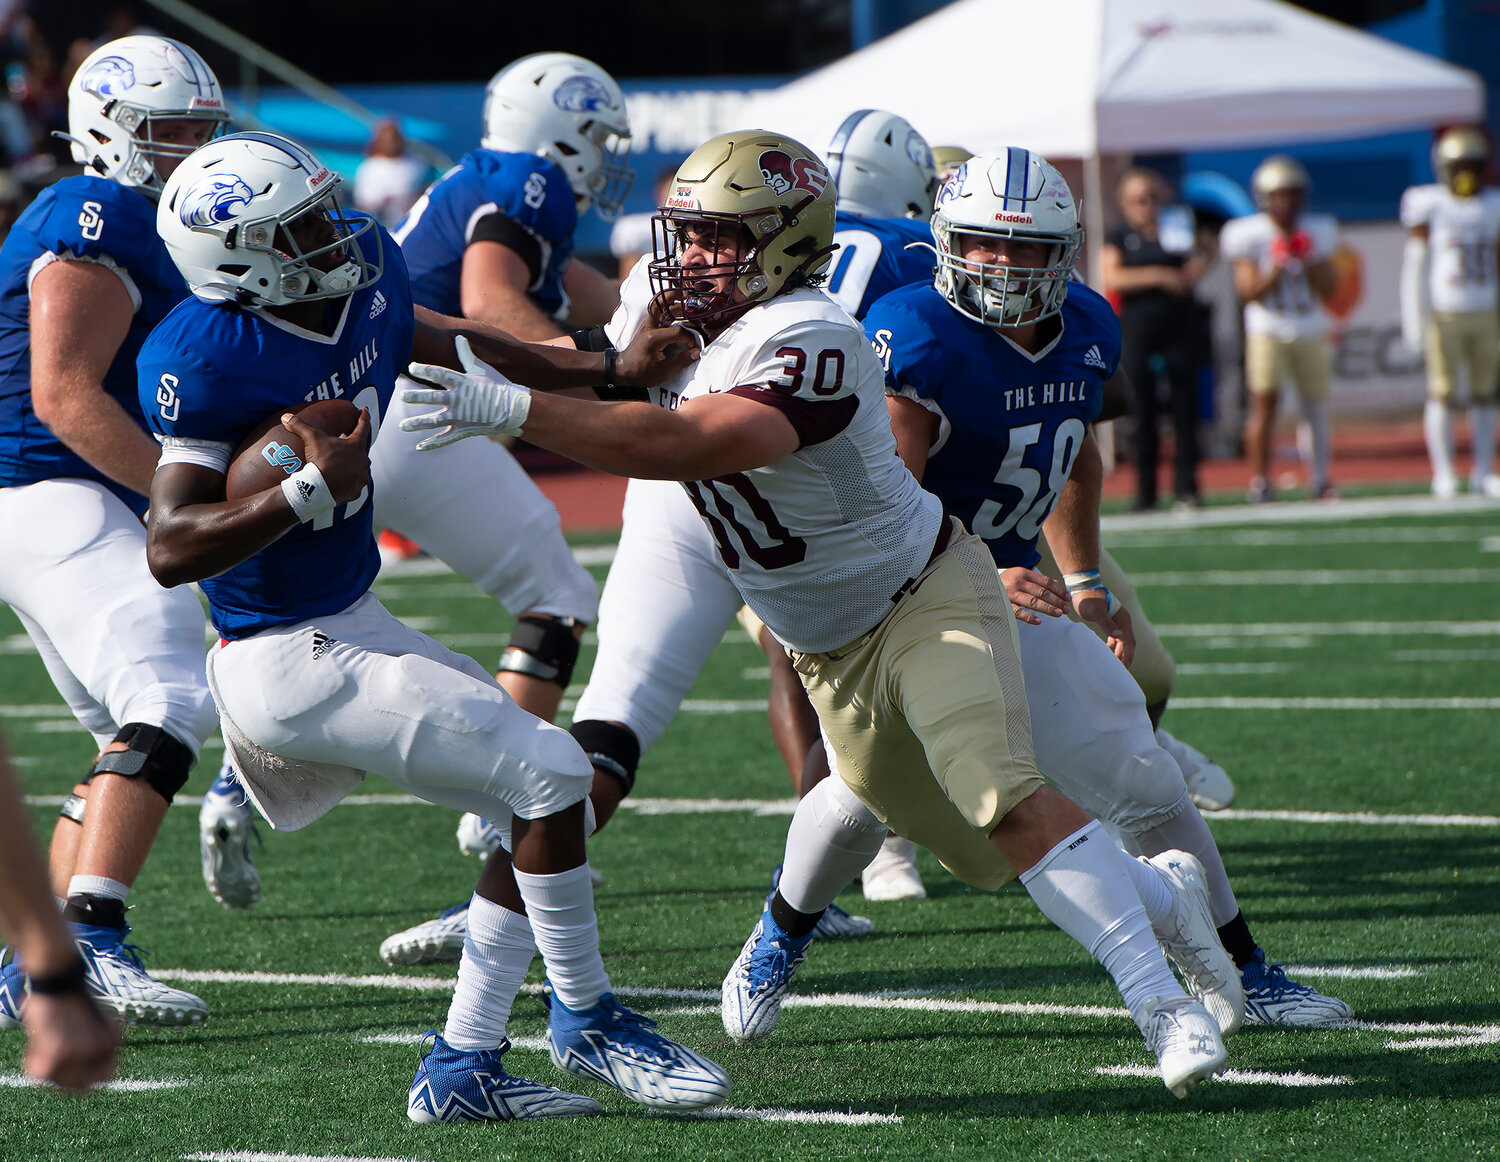 Shorter University quarterback Joshua Brown (12) eludes the tackle by Erskine College's Miller Shouse (3) in the second quarter Saturday, Sept. 9, 2023, in Rome, Ga. Brown was able to get away for a short gain. Shorter won 28-7. (Index/Henry Durand)